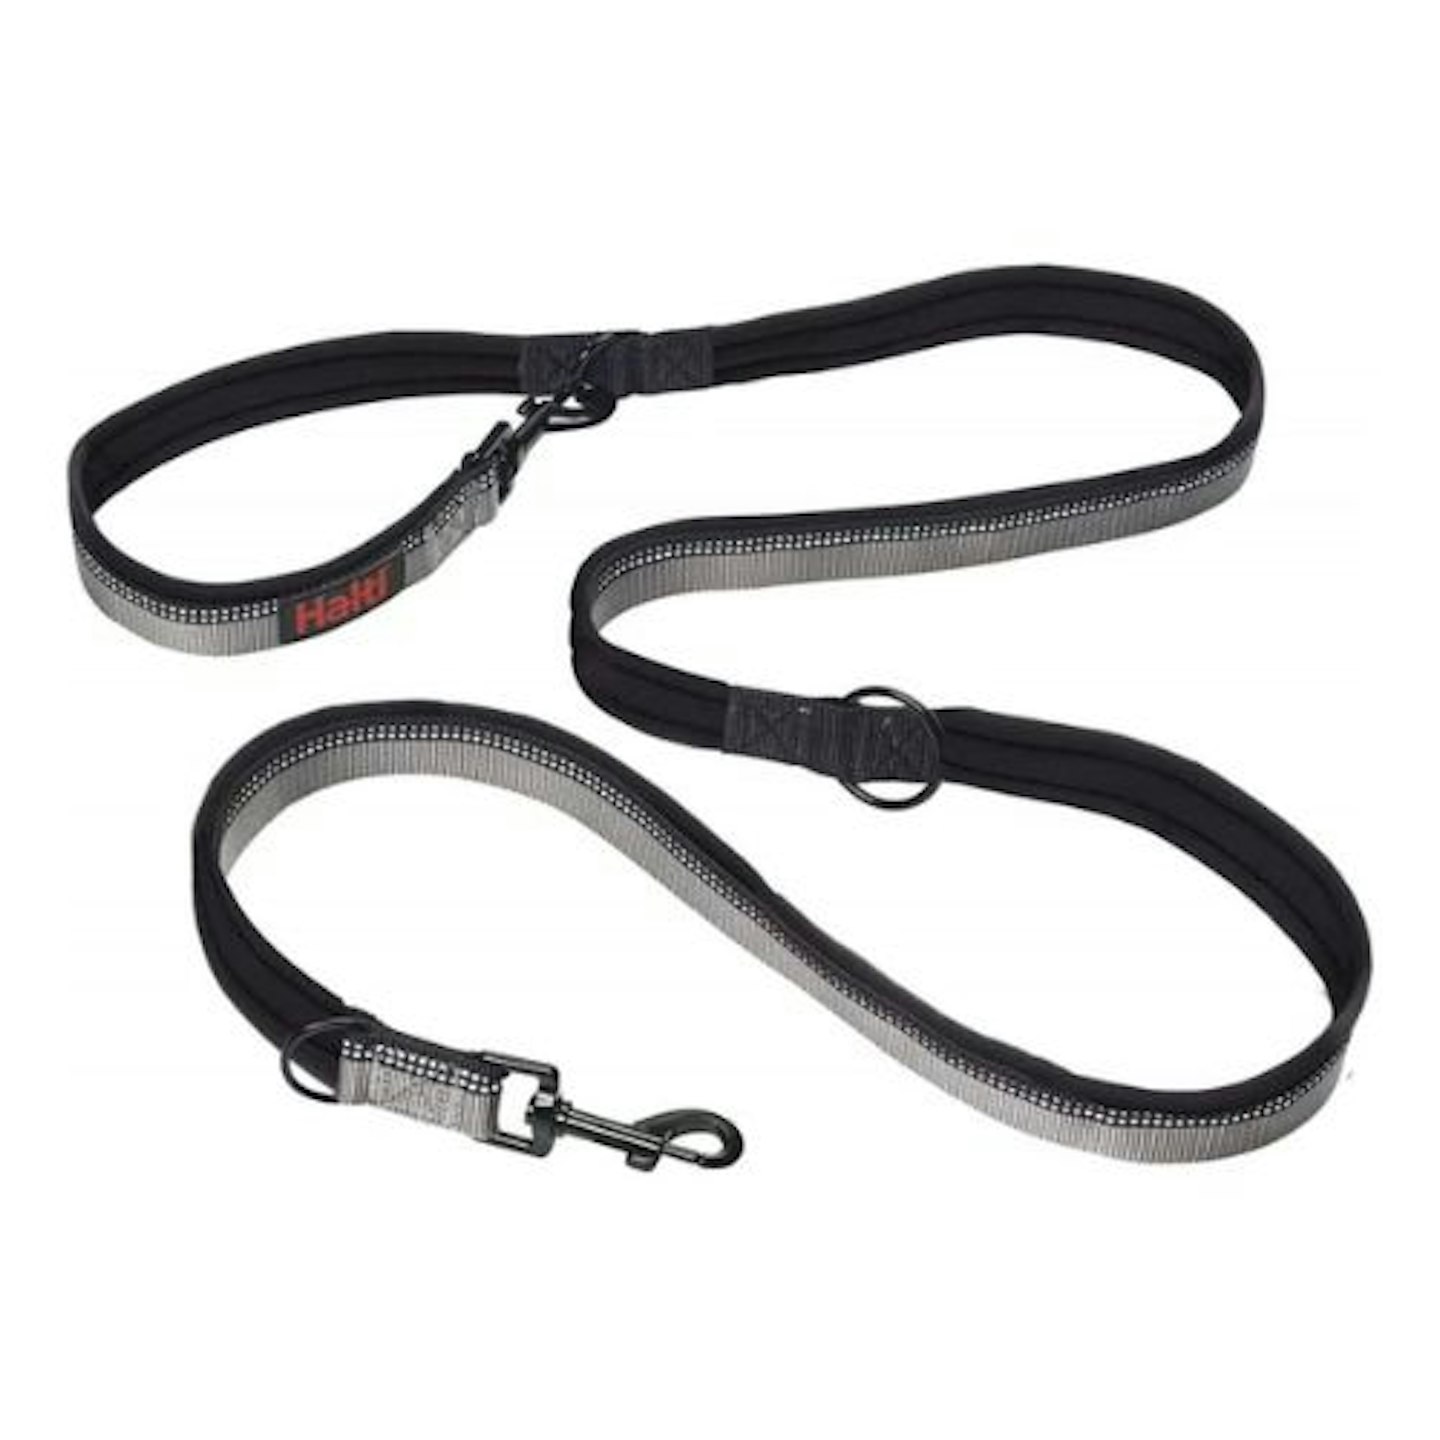 HALTI Double-Ended Lead for Dogs